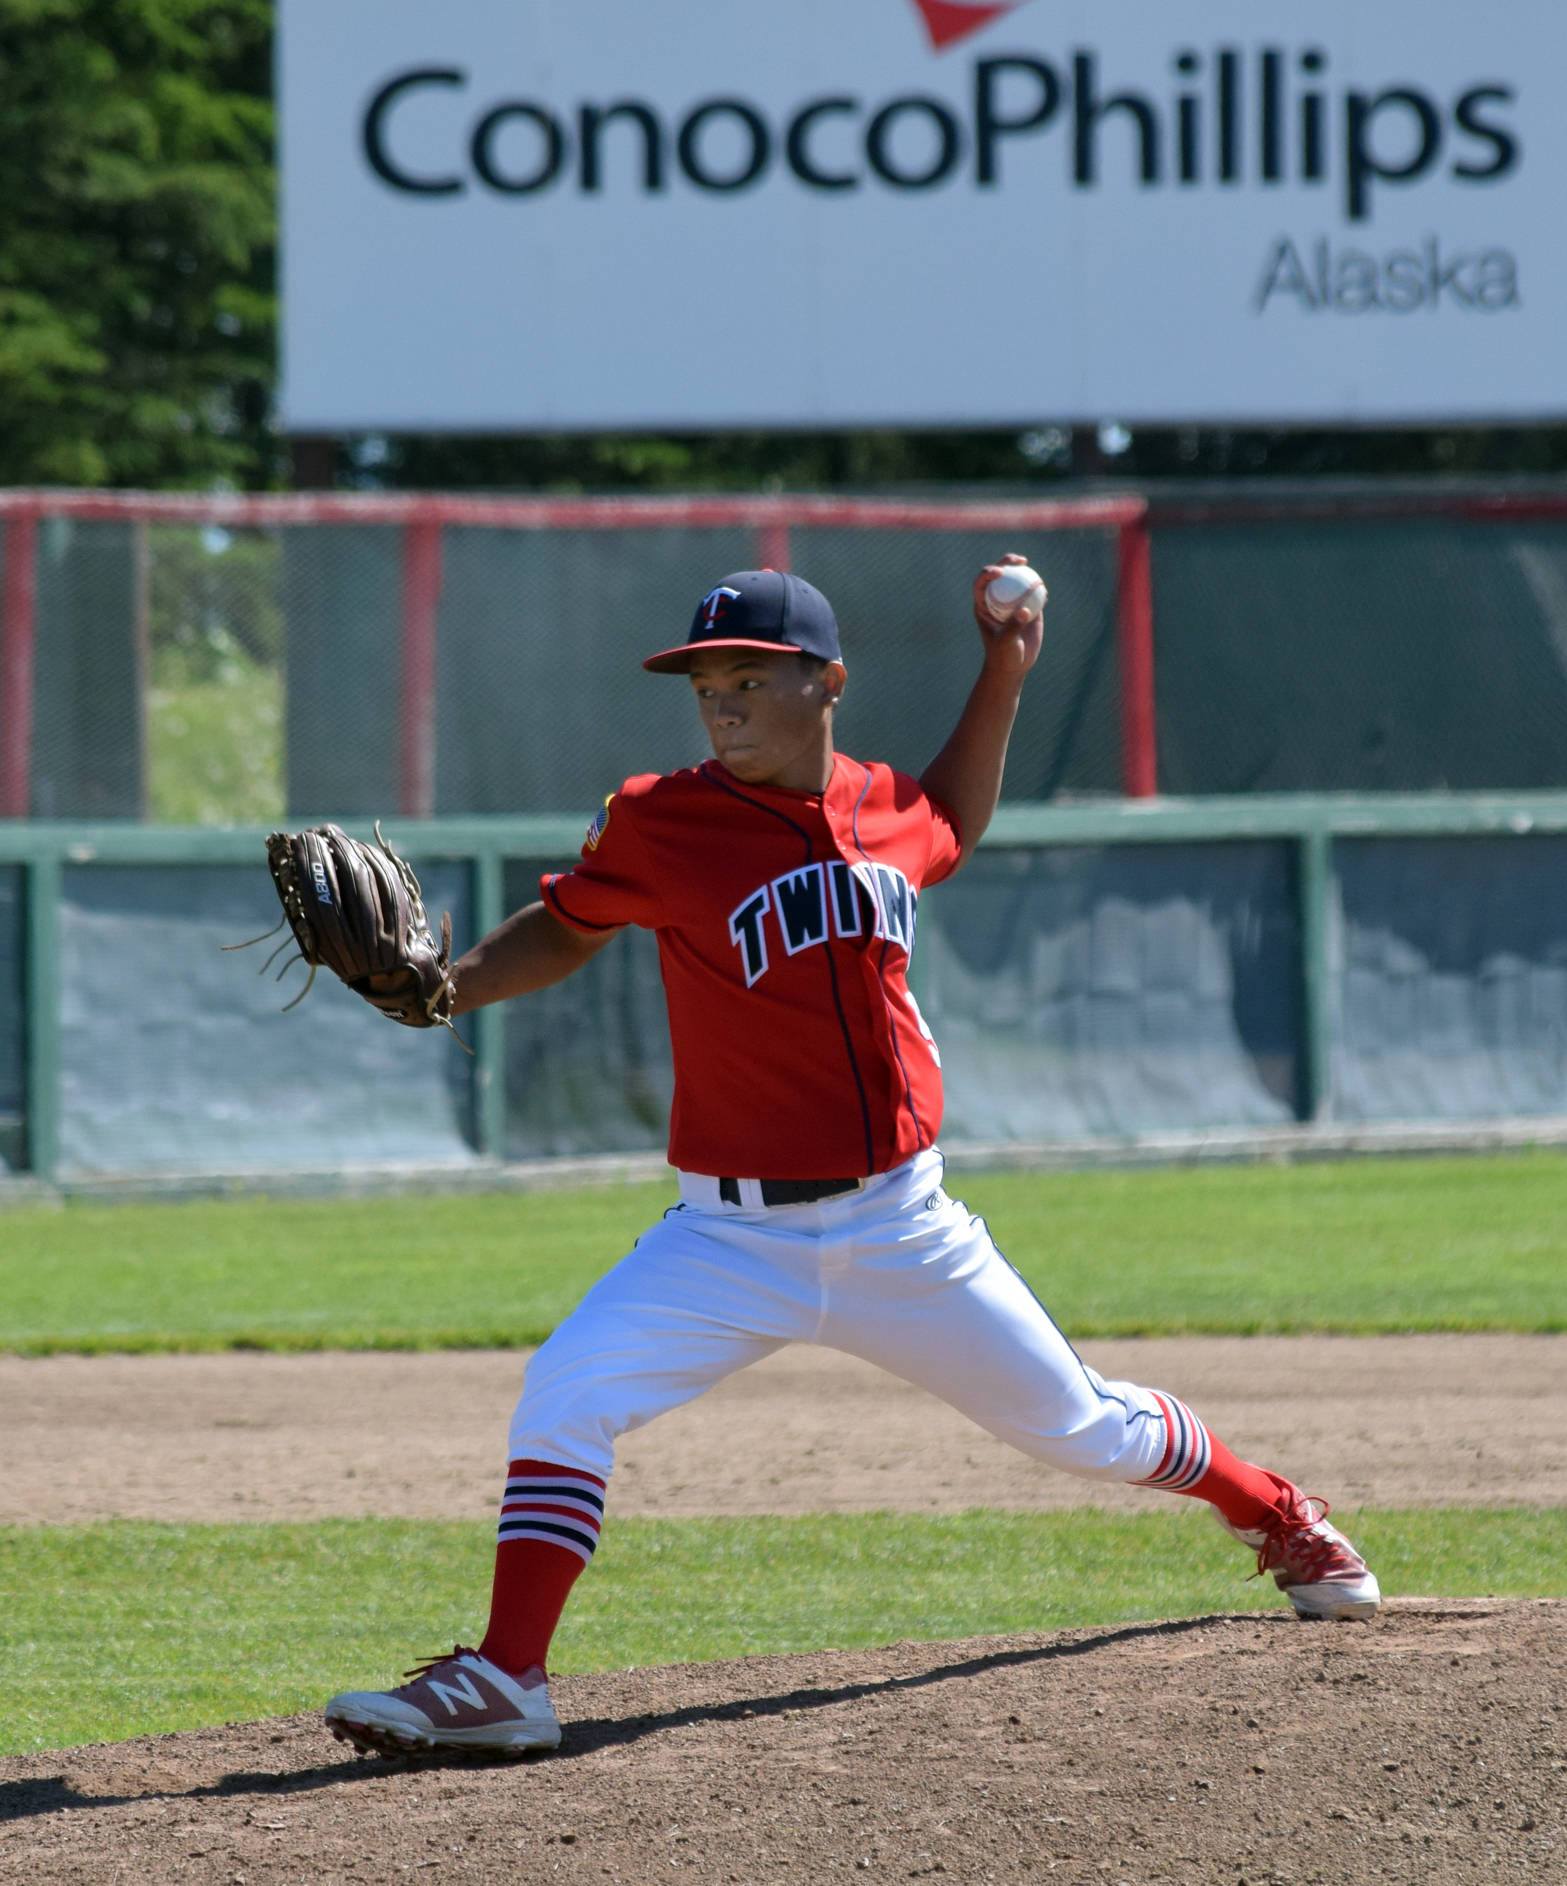 Post 20 Twins starter Harold Ochea delivers to Excelsior Post 259 from Minneapolis on Tuesday, July 3, 2018, at Coral Seymour Memorial Park in Kenai. (Photo by Jeff Helminiak/Peninsula Clarion)